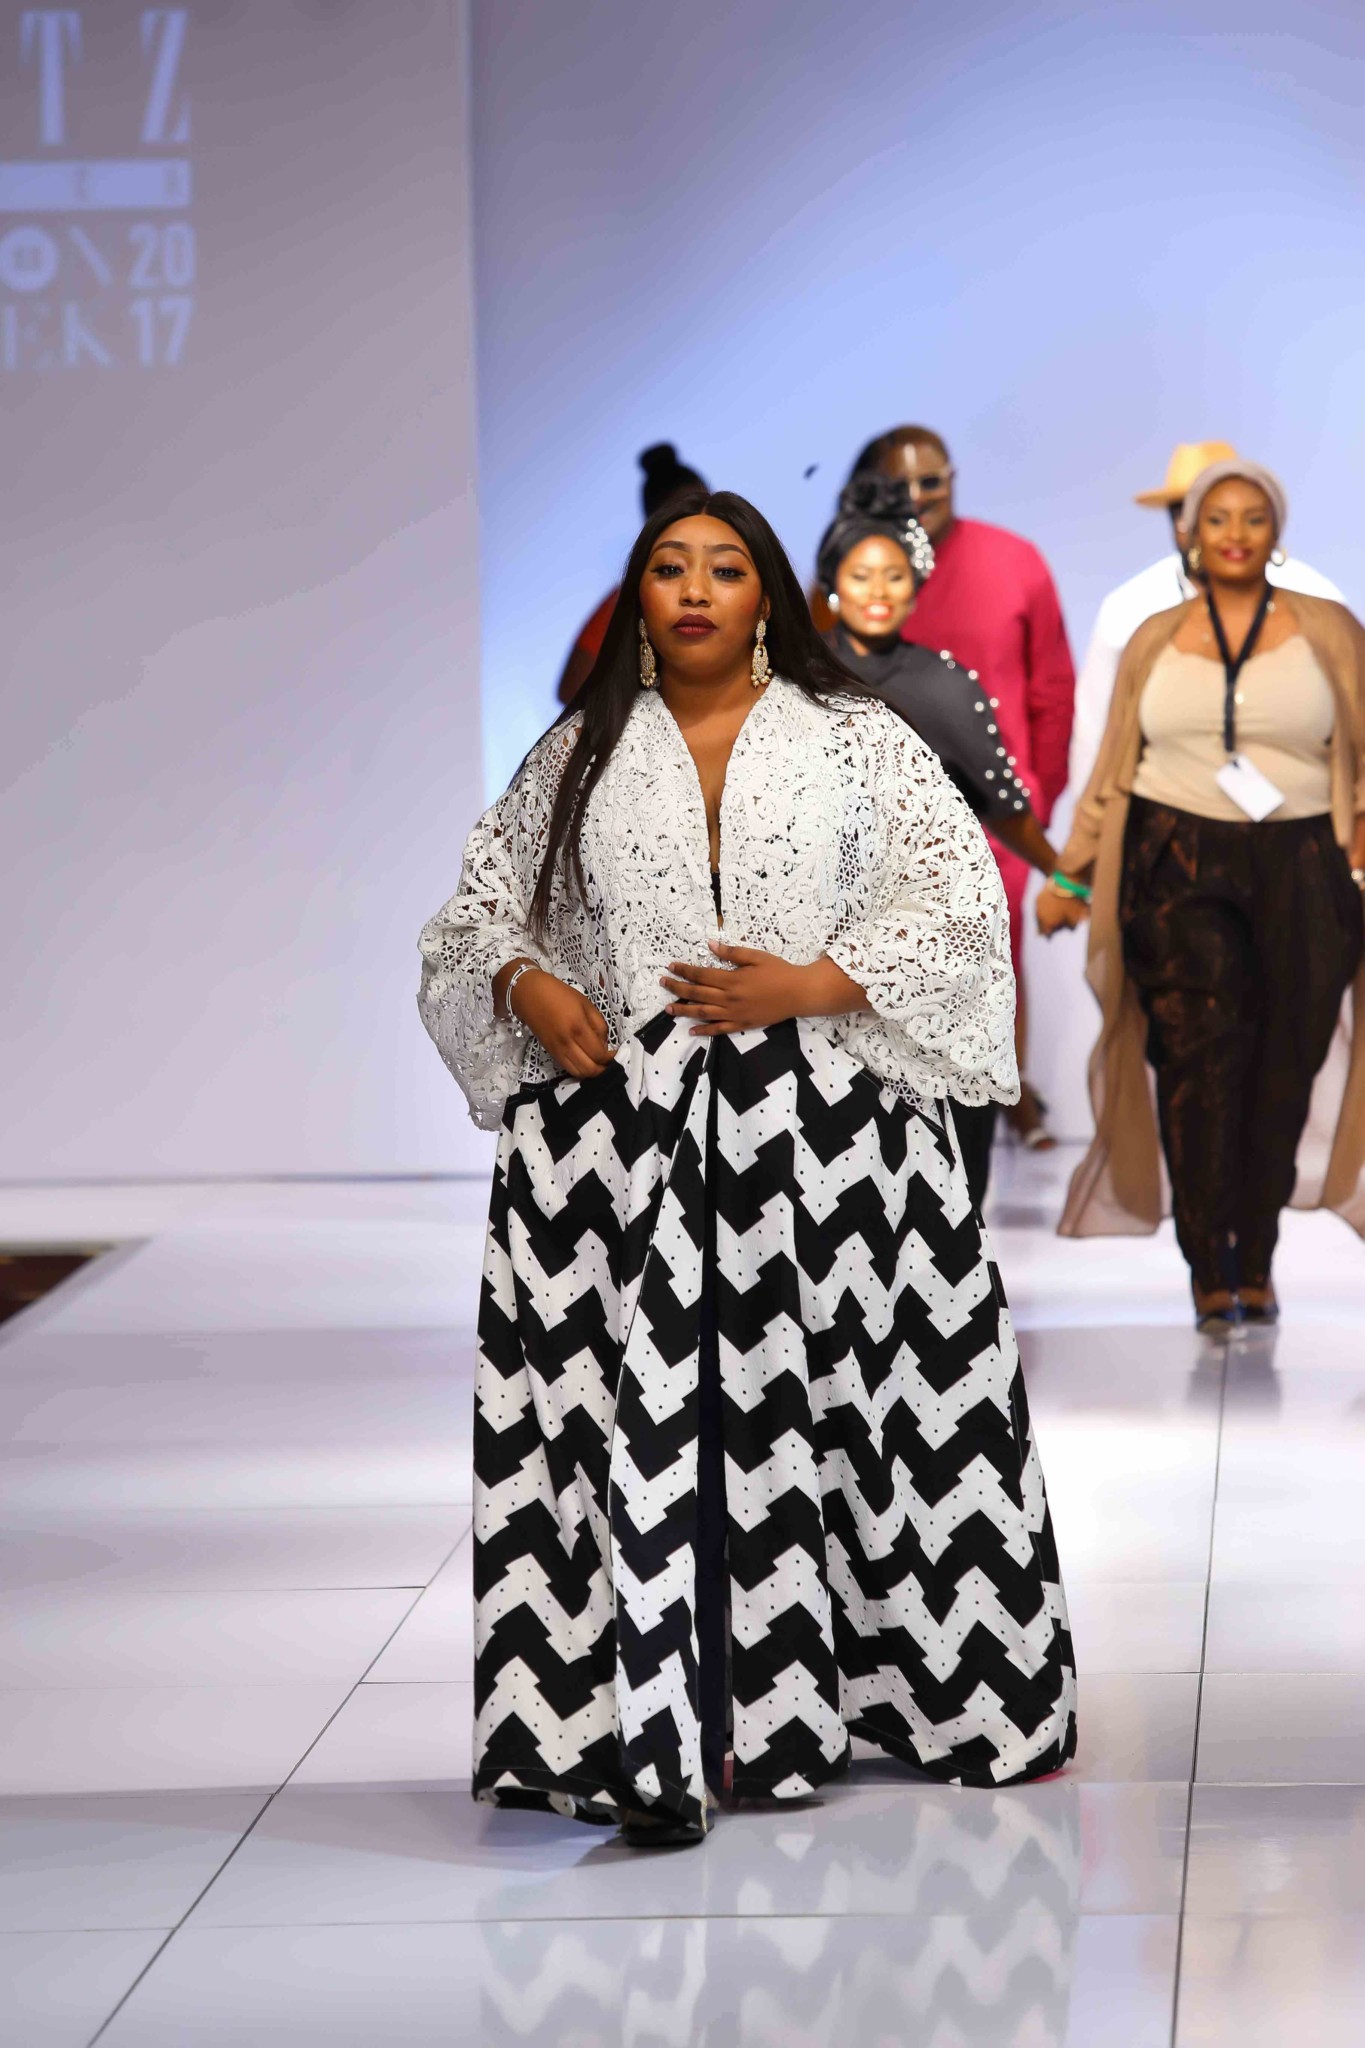 About Us – Curvy Couture